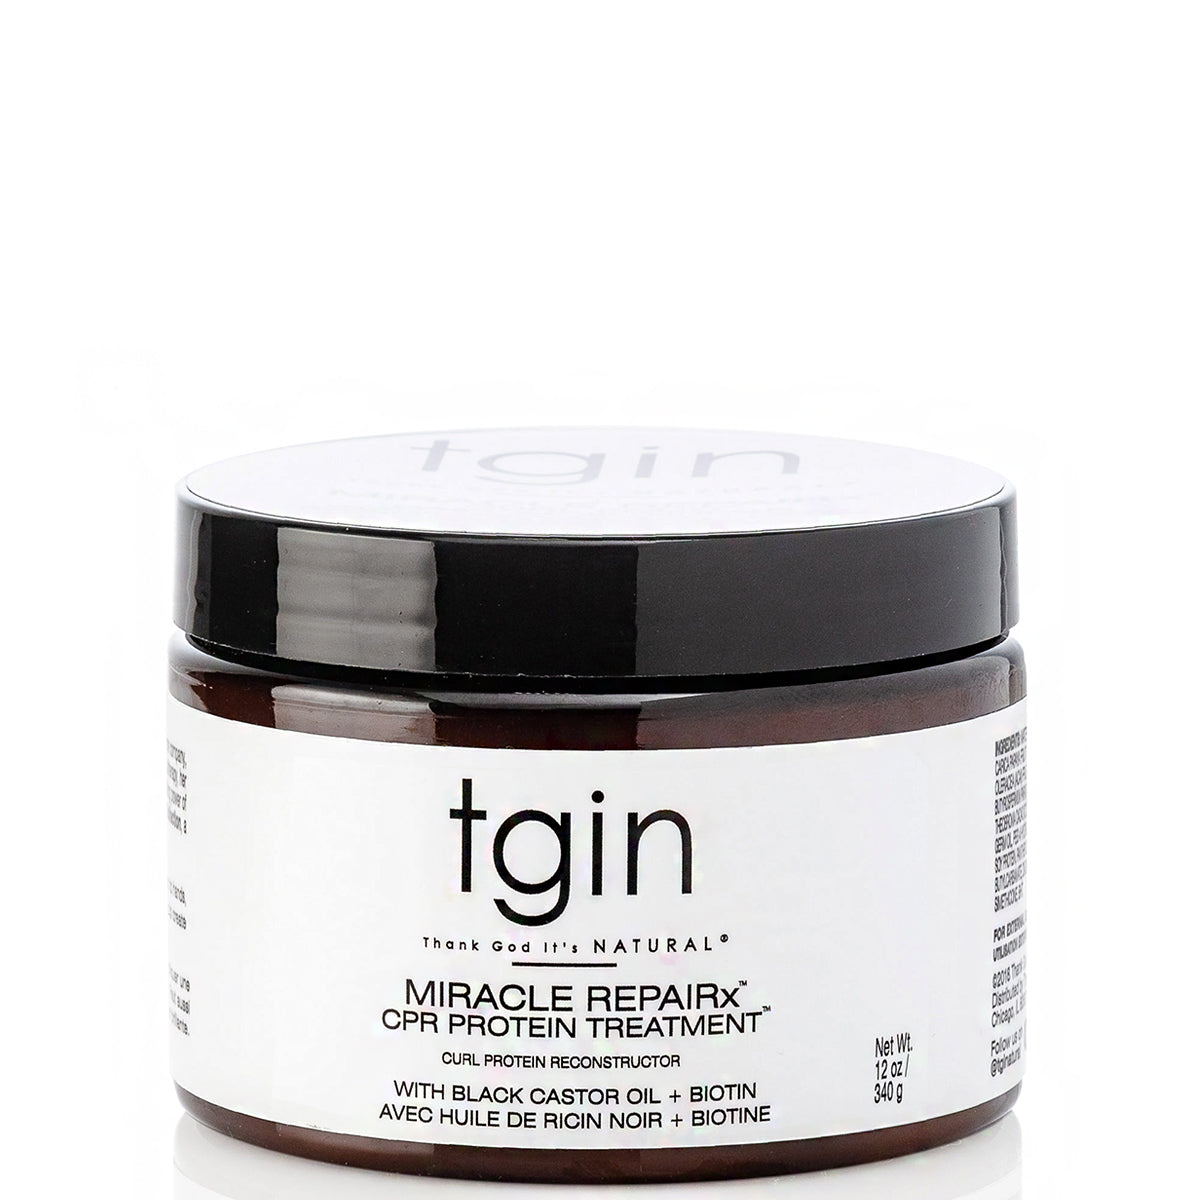 Tgin Miracle Repairx CPR Protein Treatment 12oz